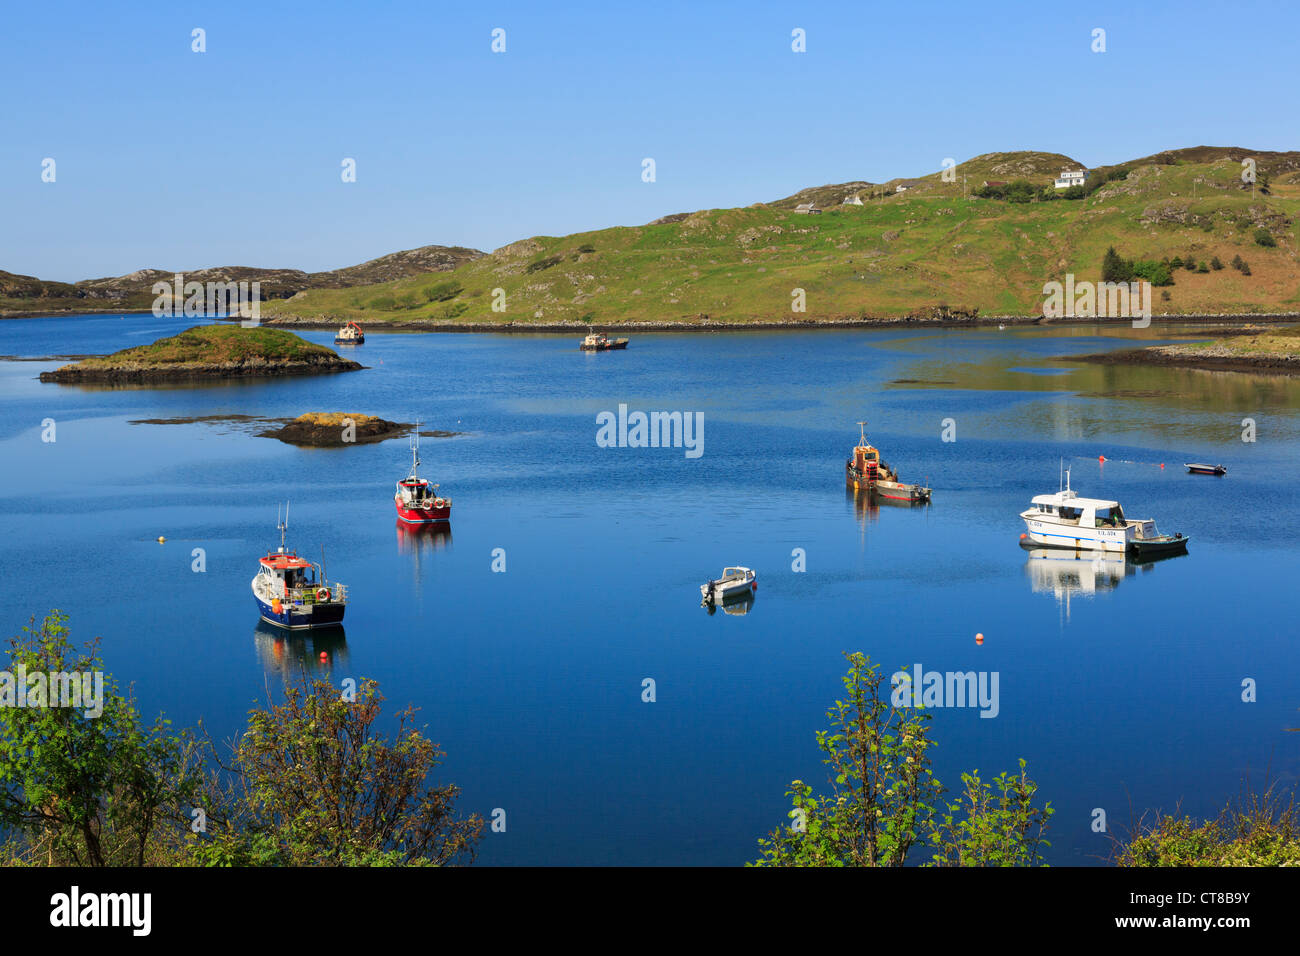 View of boats moored in calm blue waters of Badcall Bay on Scottish west coast near Scourie, Sutherland, Highland, Scotland, UK Stock Photo